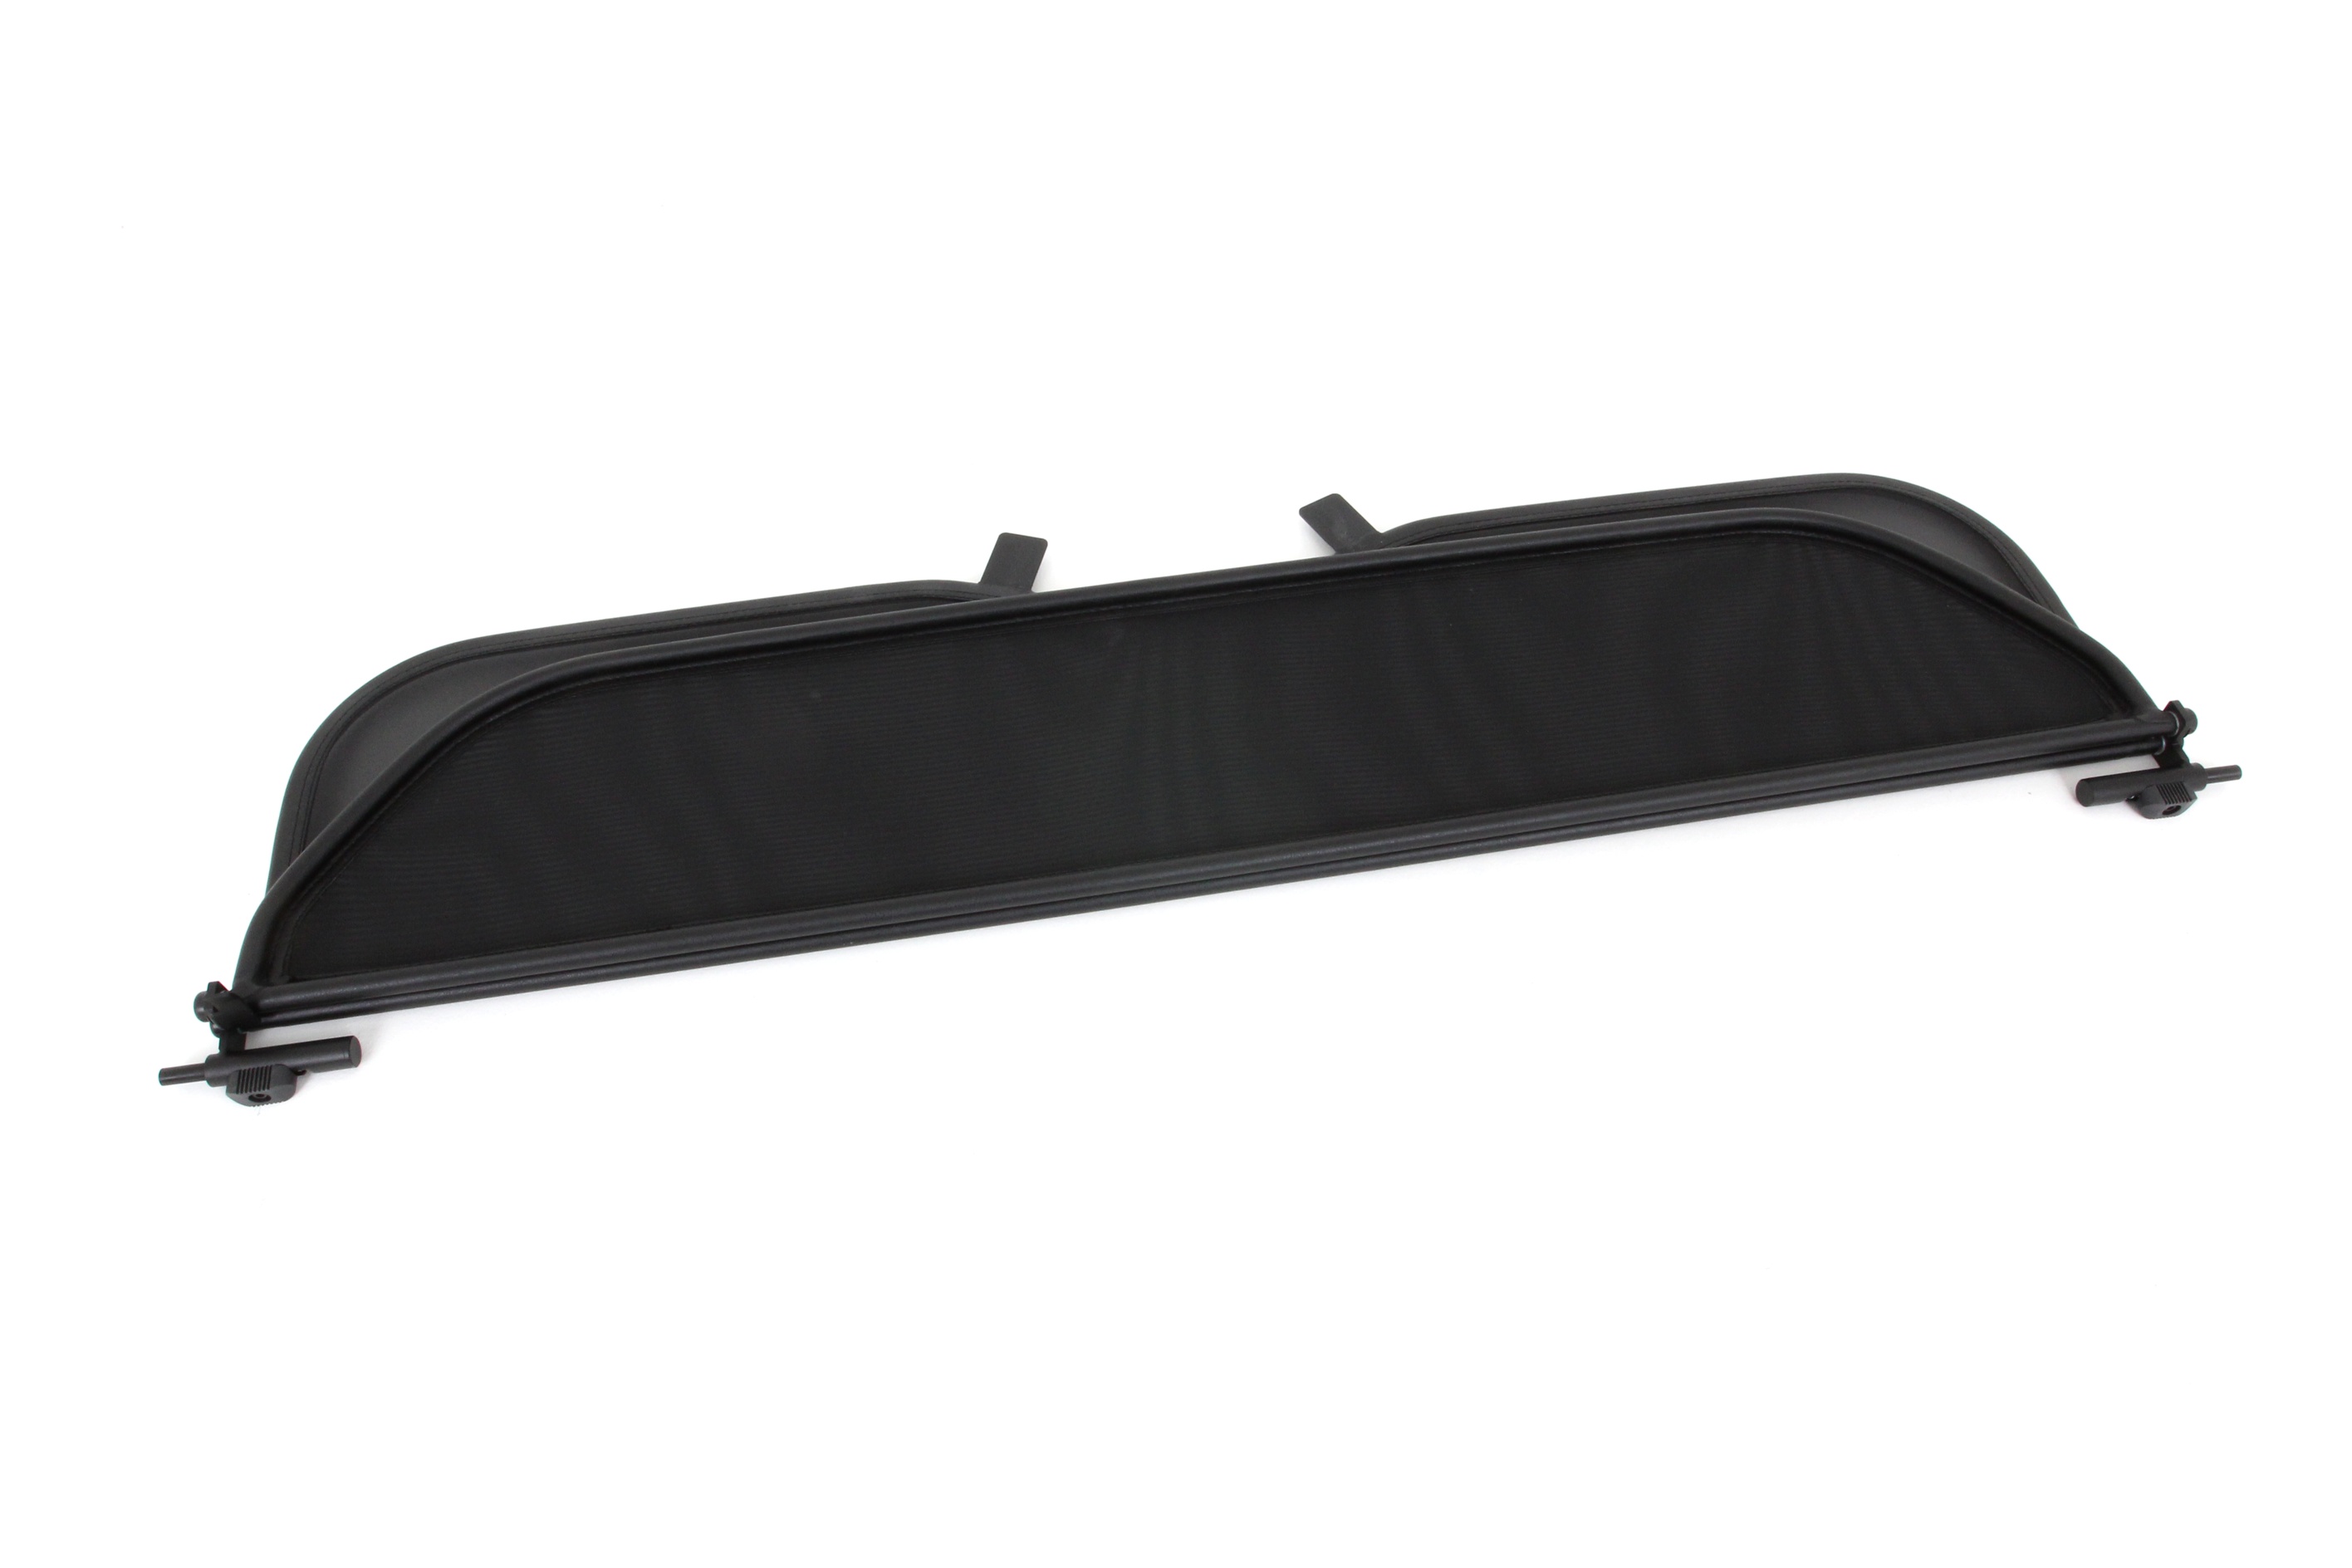 Wind deflector suitable for Aston Martin DB11 Volante with quick fastener